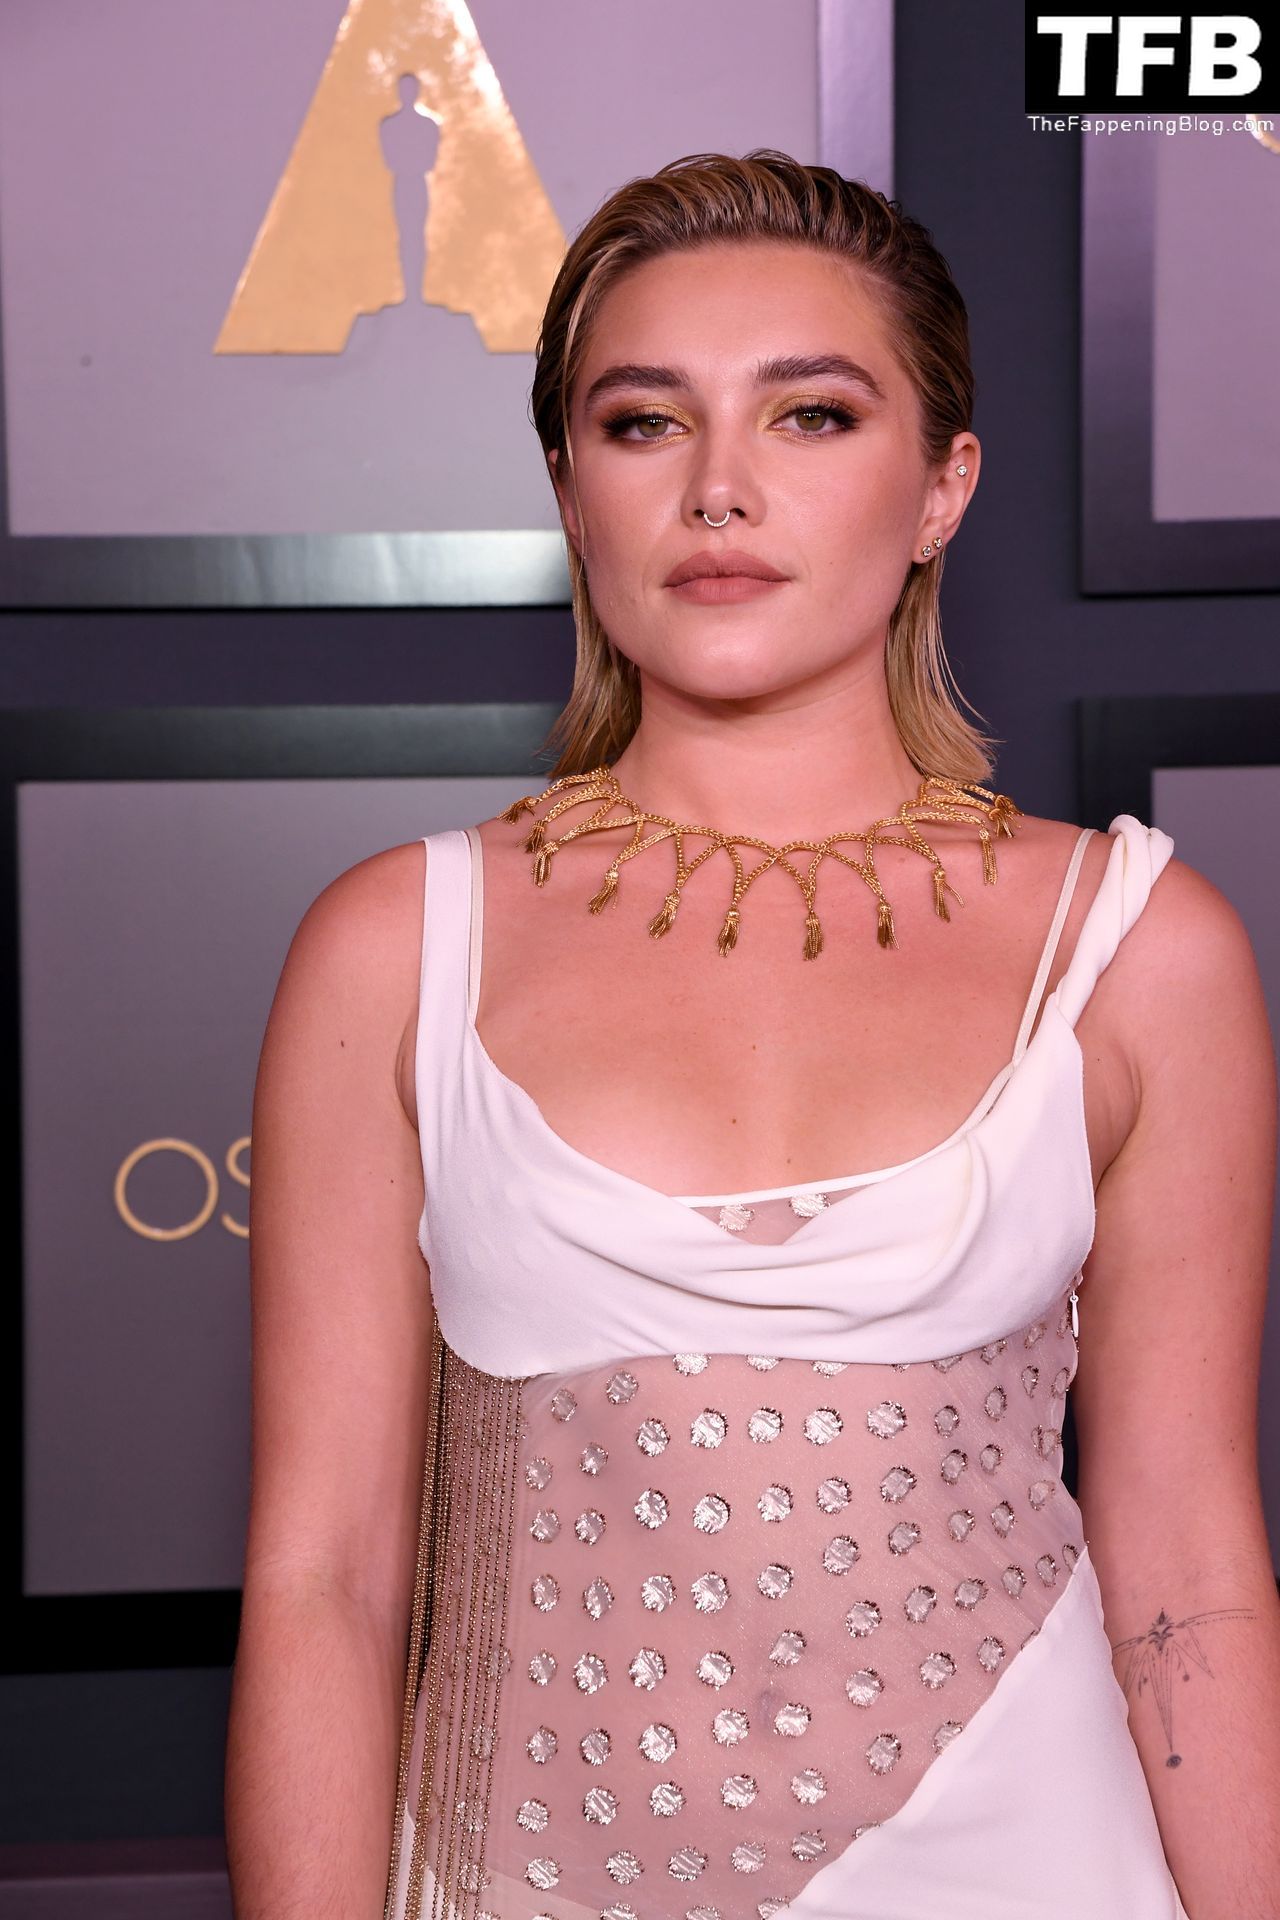 Florence-Pugh-Sexy-The-Fappening-Blog-31.jpg